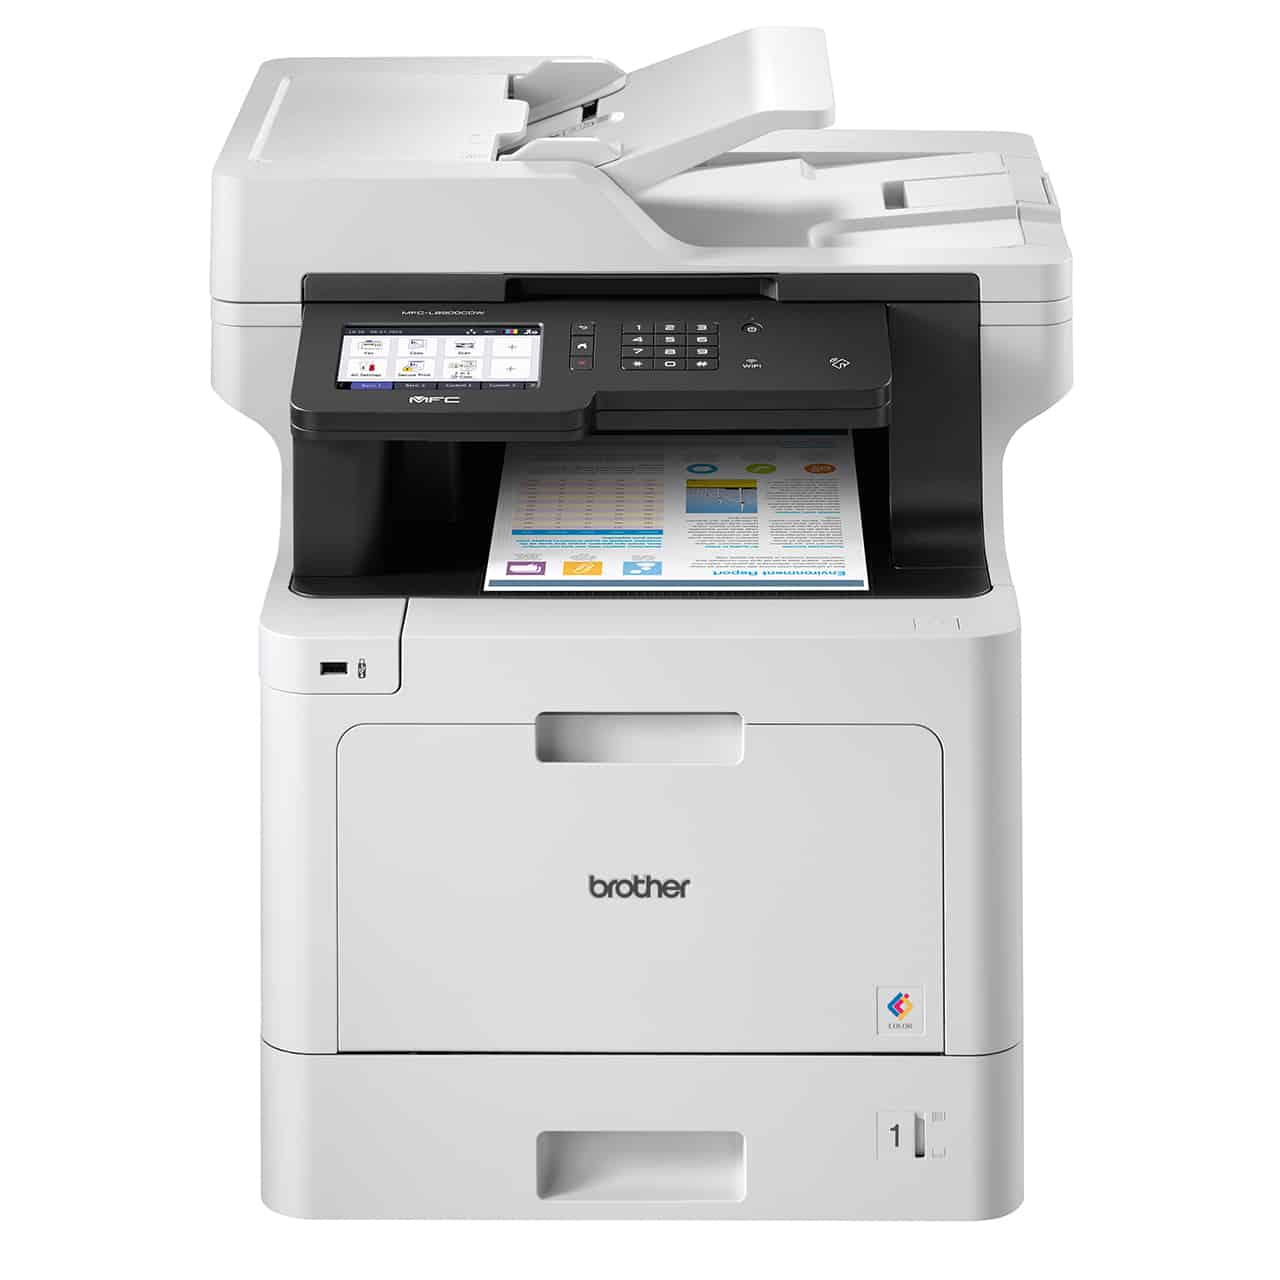 Brother MFC-L8900CDW Colour Laser Multi-Function Printer